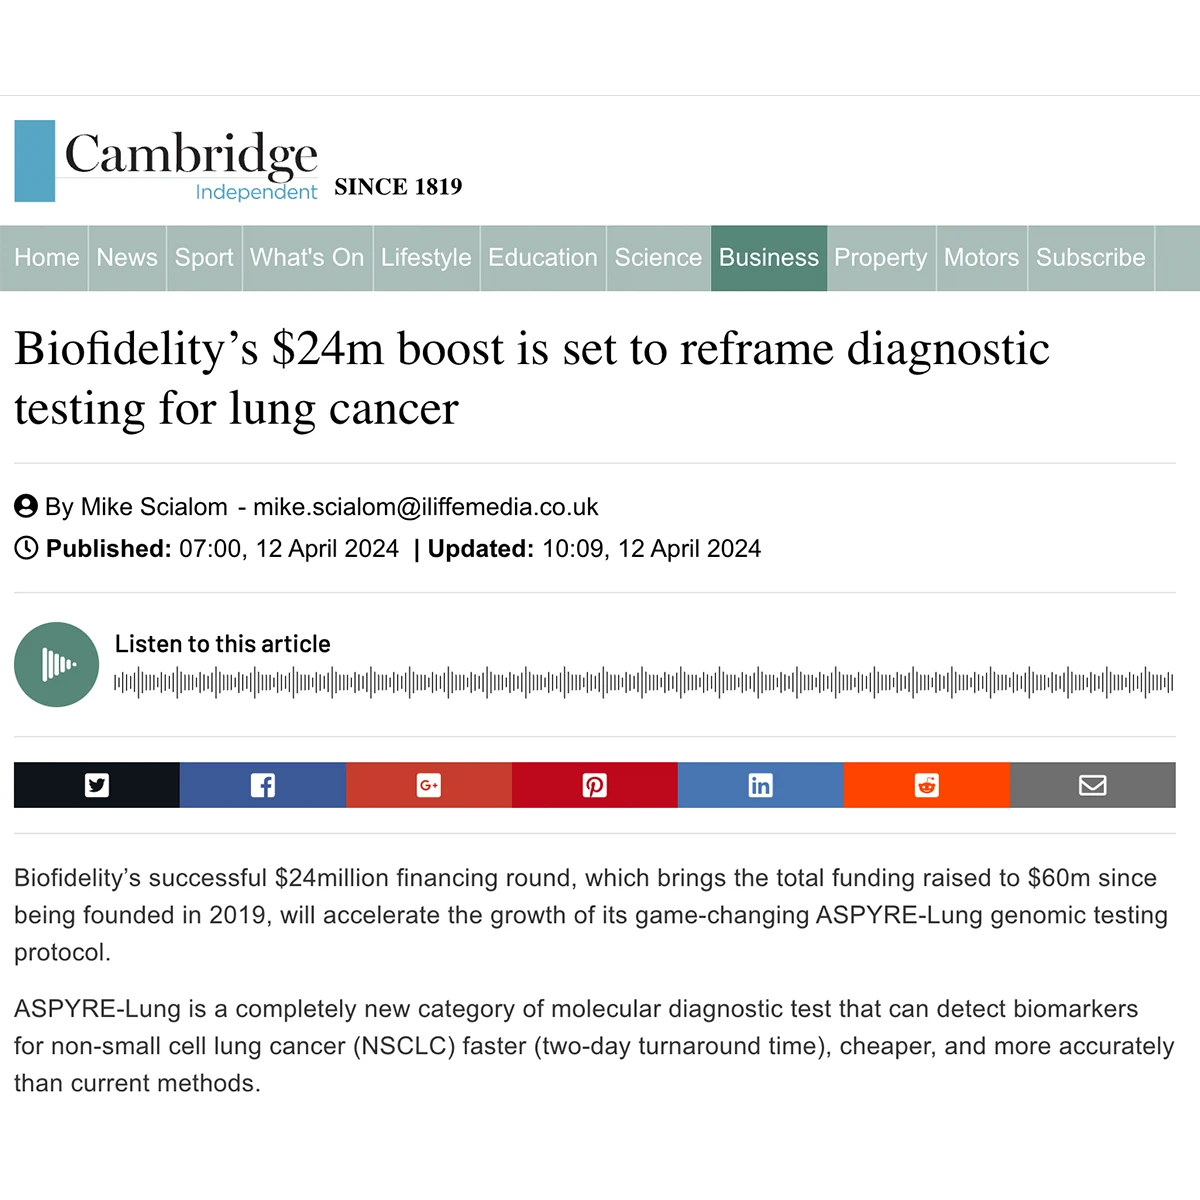 Biofidelity’s $24m boost is set to reframe diagnostic testing for lung cancer